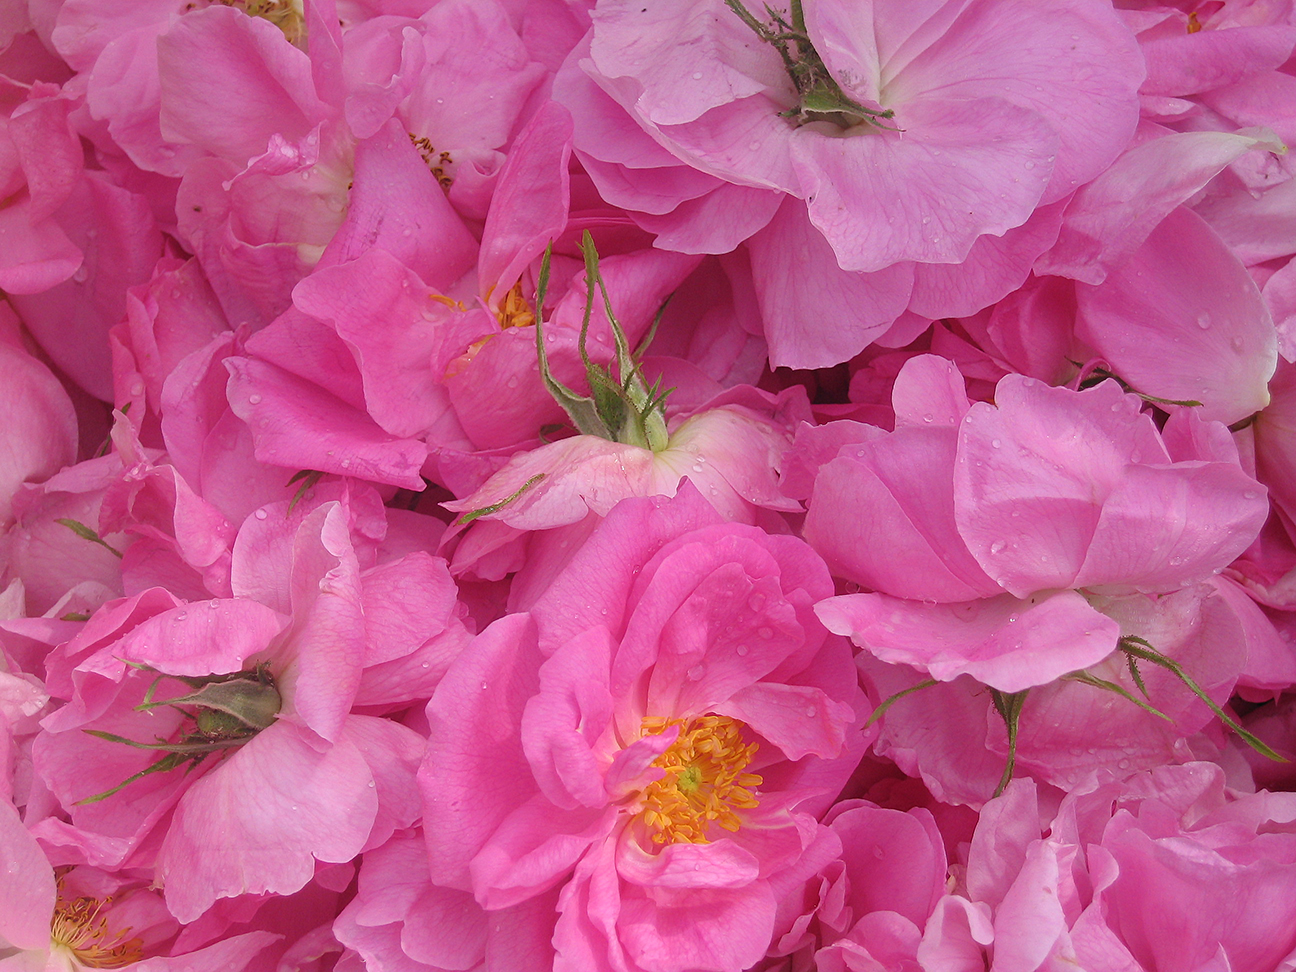 Damascena rose blossoms to make Rose Essential Oil and Water